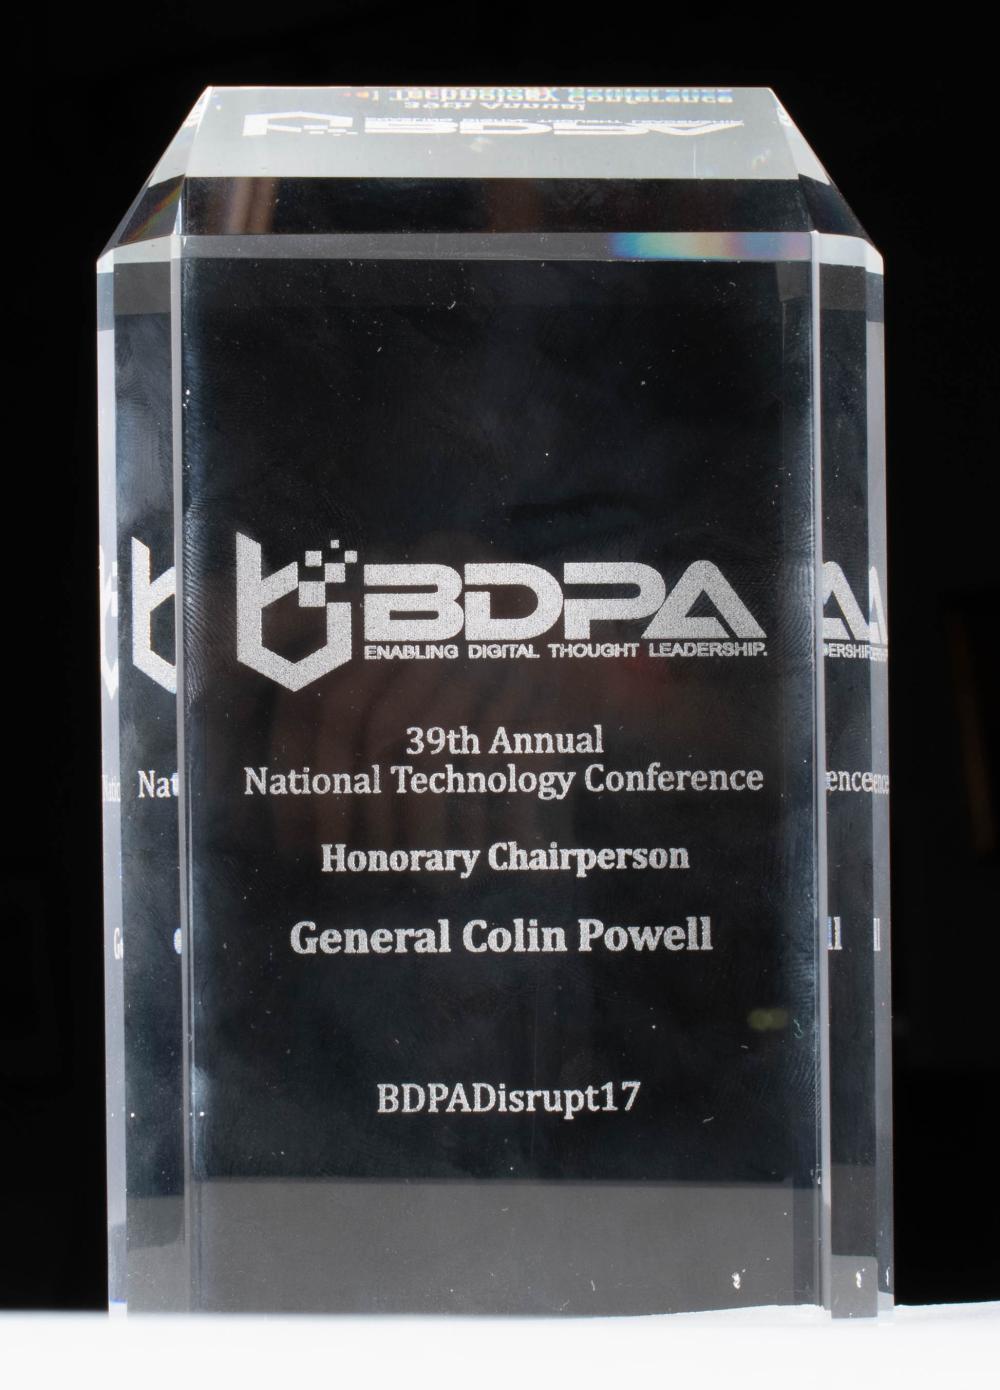 GLASS AWARD FROM THE B.D.P.A. 39TH